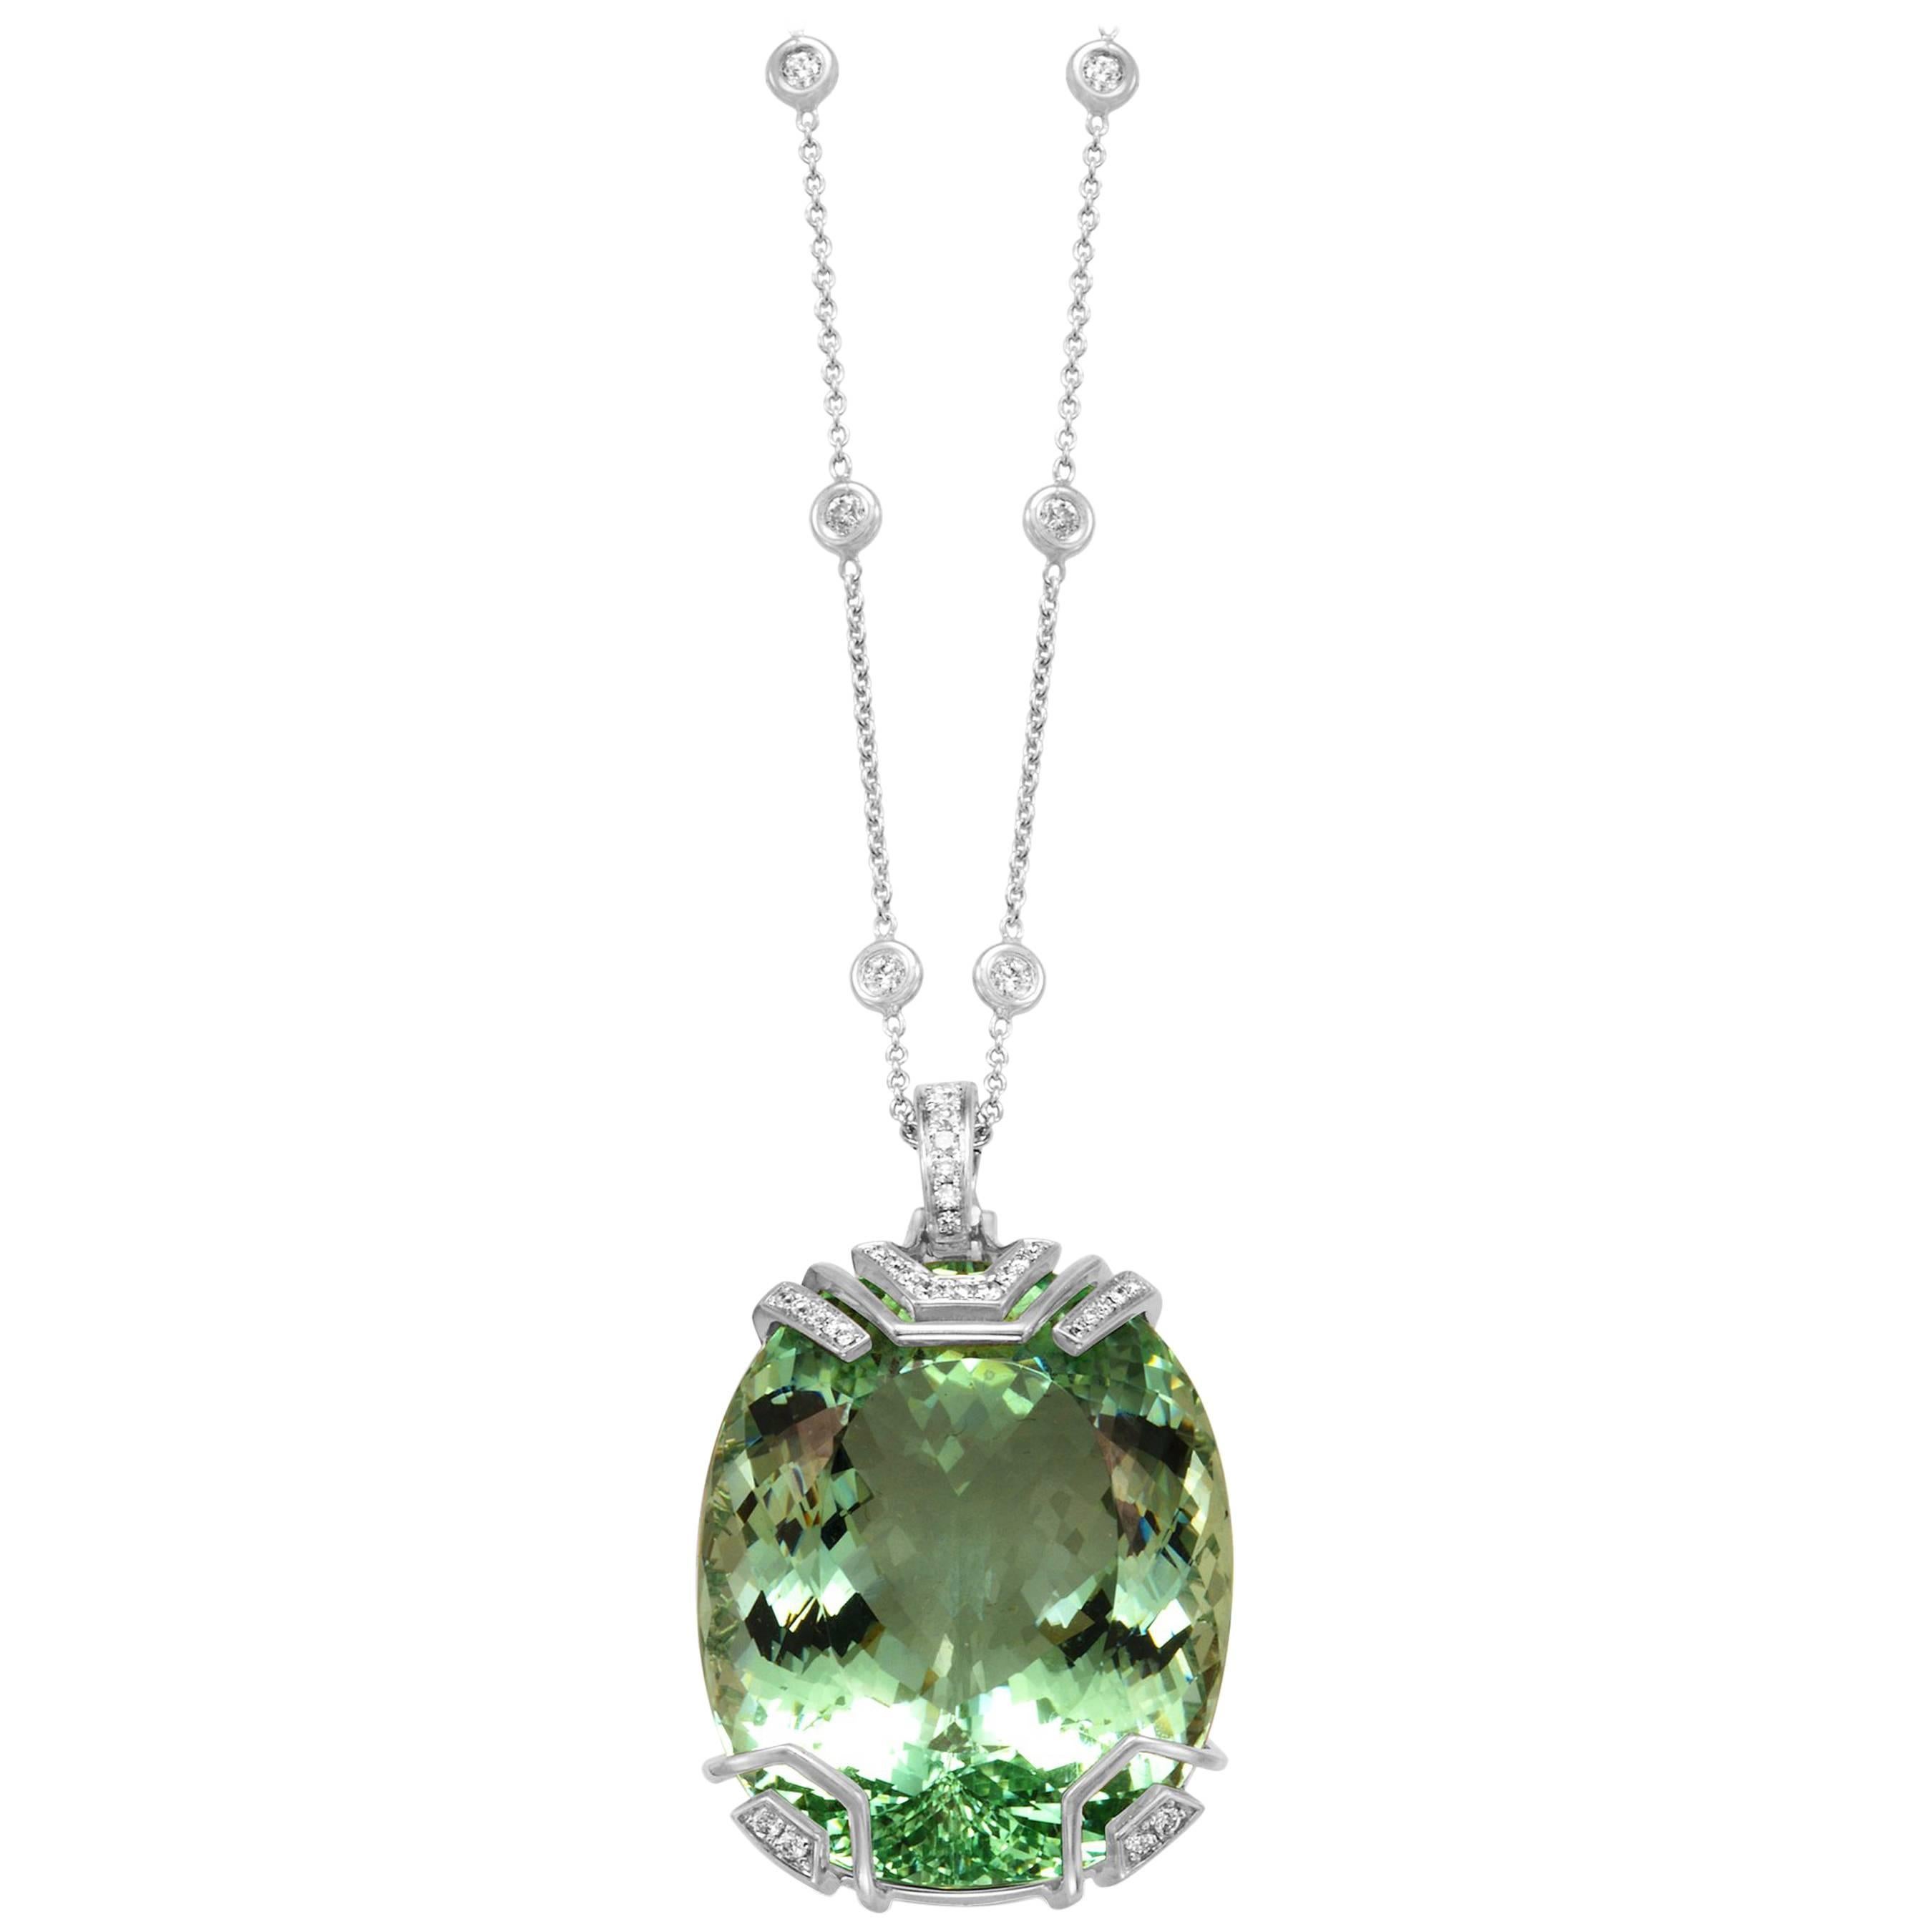 One-of-a-kind Frederic Sage oval cabochon Green Beryl pendant with diamond accents and diamond bale with 18 inch diamond-accented chain (included) set in 18 karat white gold

Total Green Beryl weight: 76.83 ct
Total diamond count: 30
Total diamond